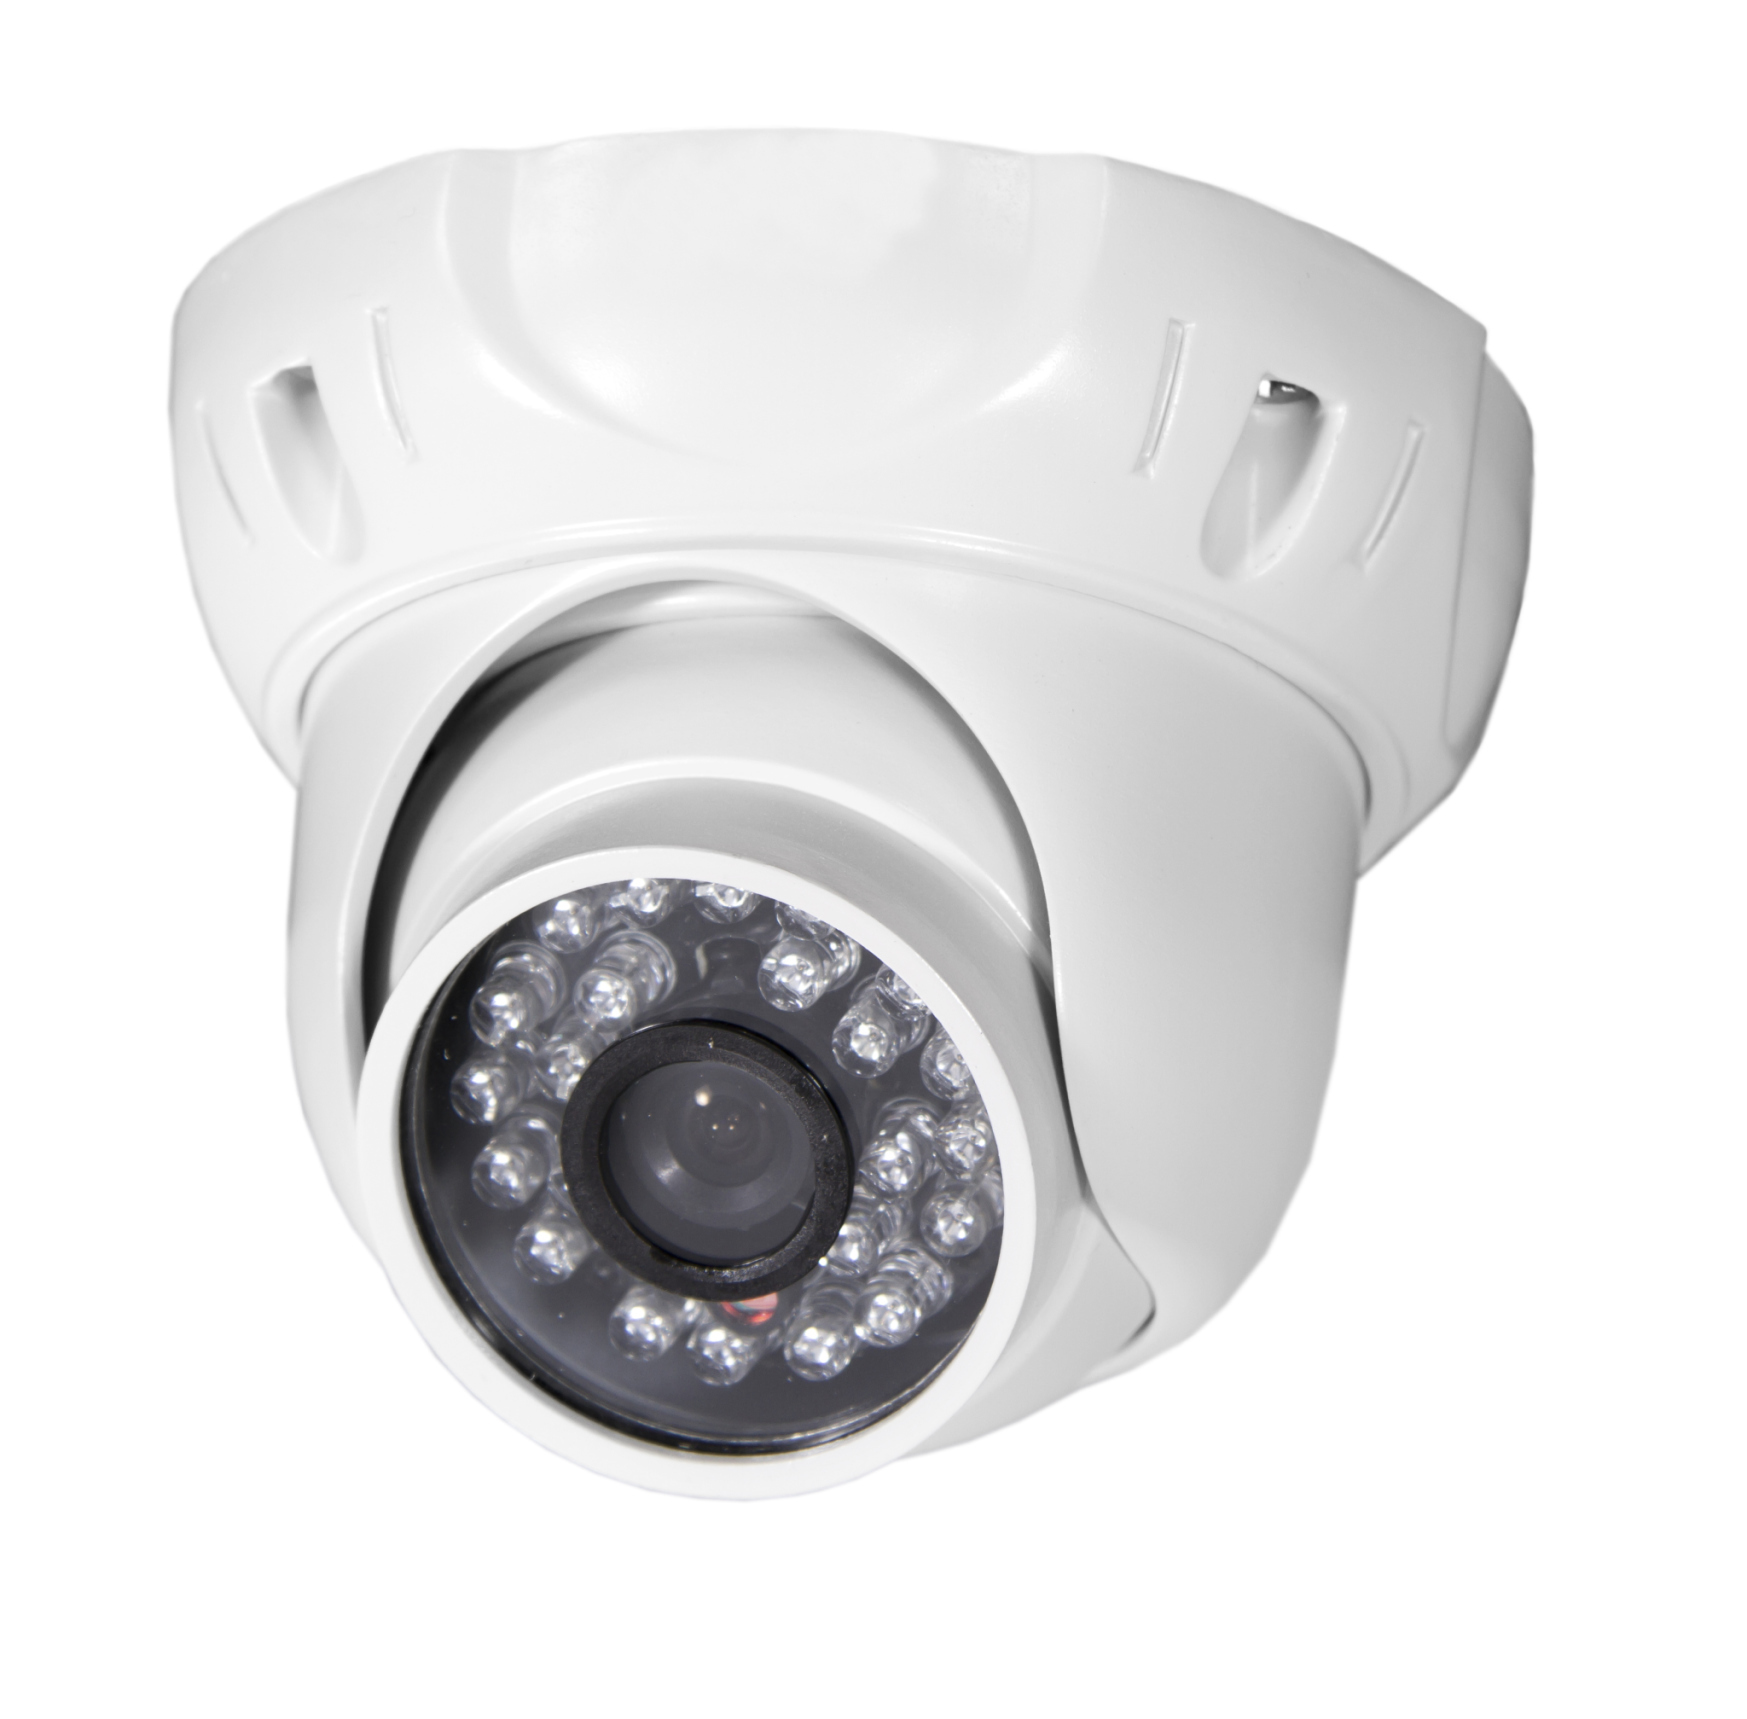 The Dos and Don'ts of Installing Home Surveillance Cameras